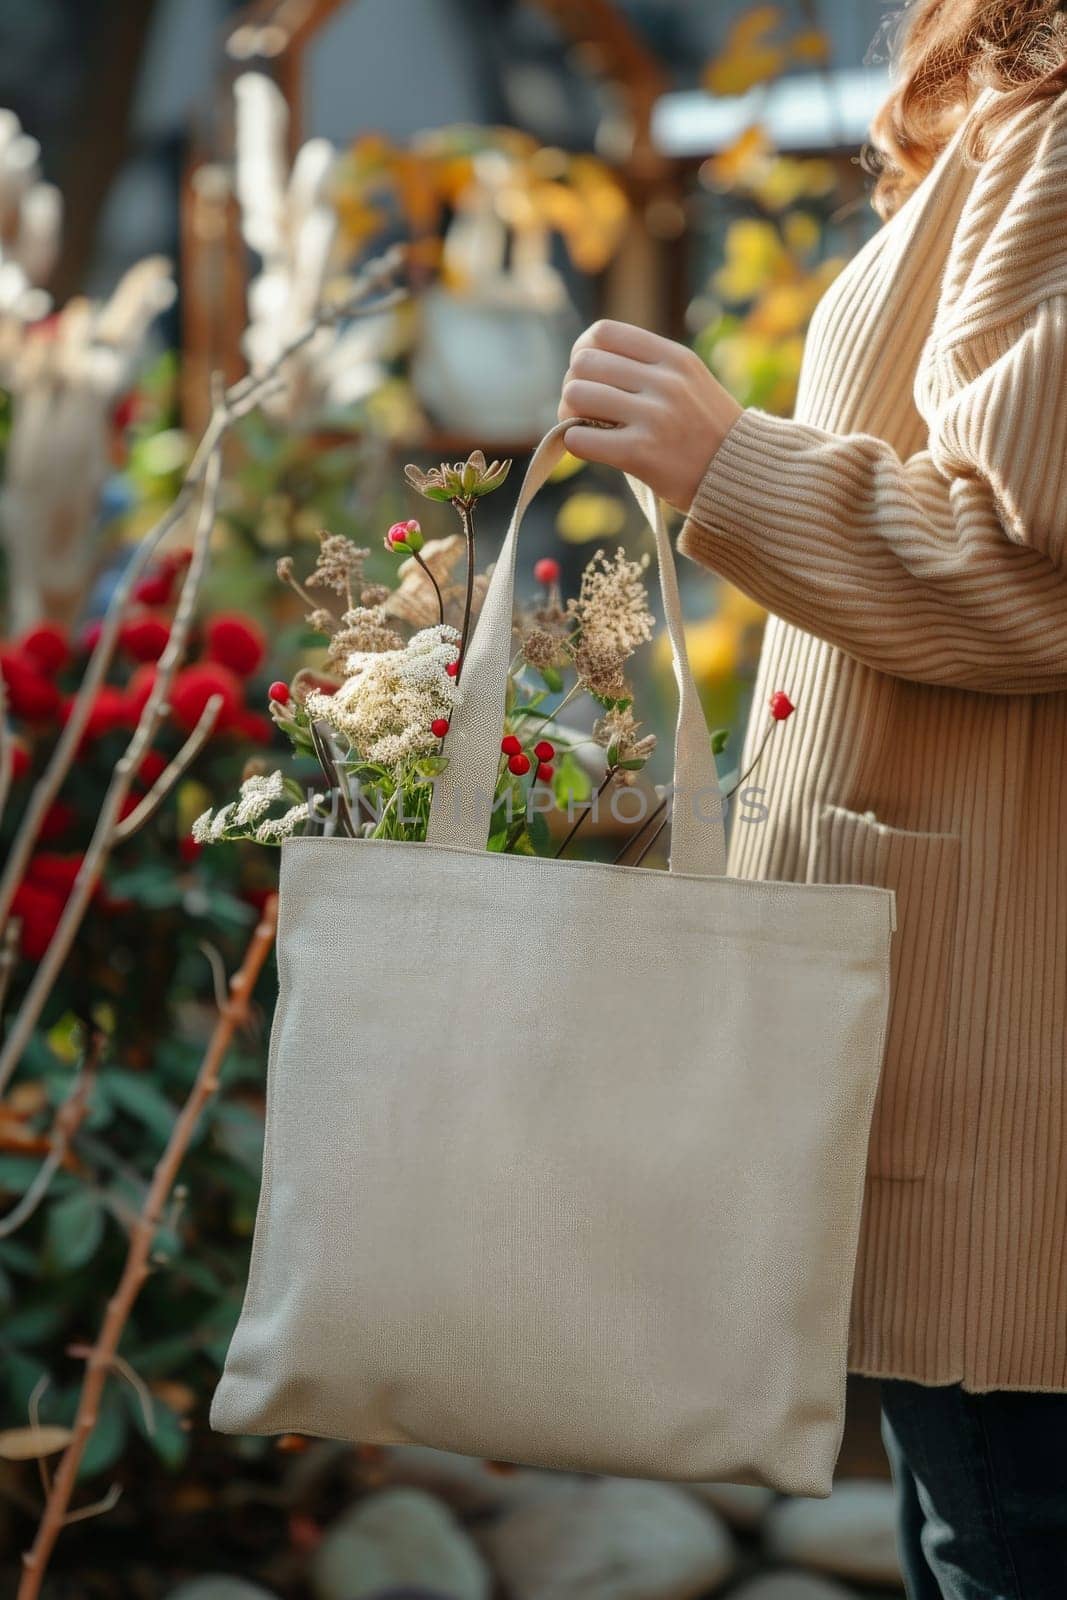 A woman is holding a white canvas tote bag. The bag is plain and unadorned, but it is a blank canvas for the woman to fill with her own personal style and creativity